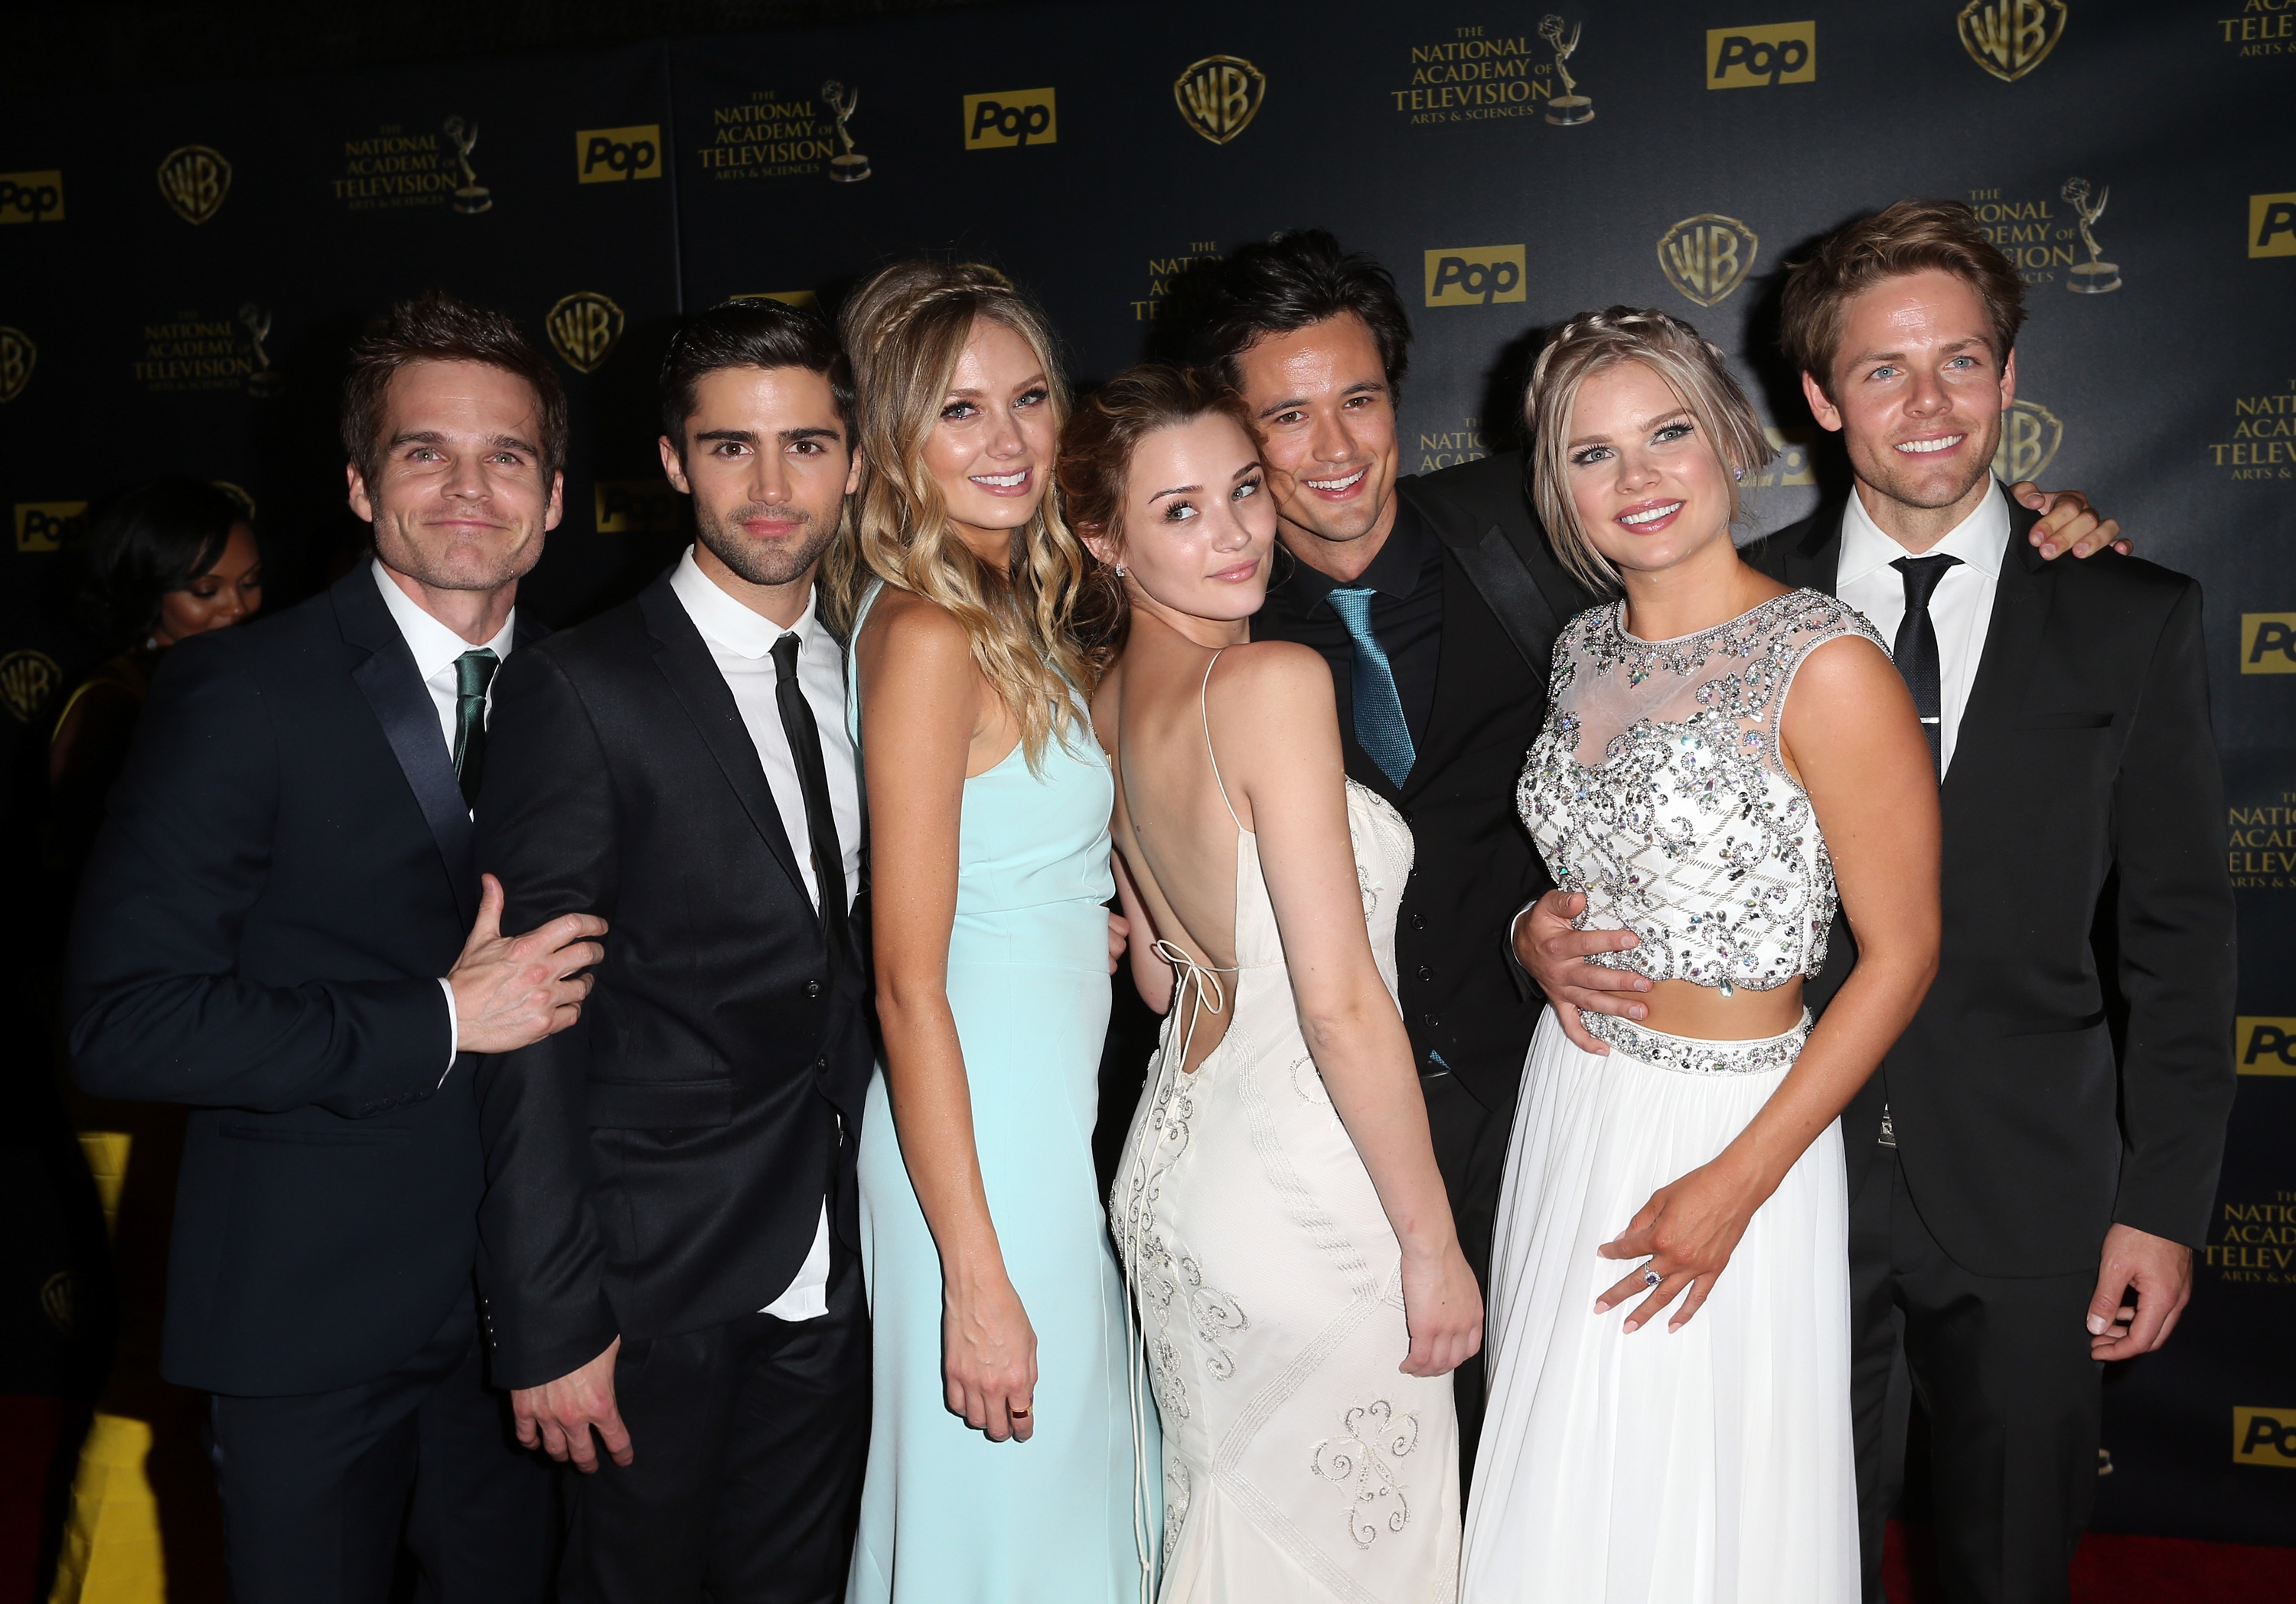 'The Young and the Restless' cast members pose for a group photo on the red carpet of the 2015 Daytime Emmys.